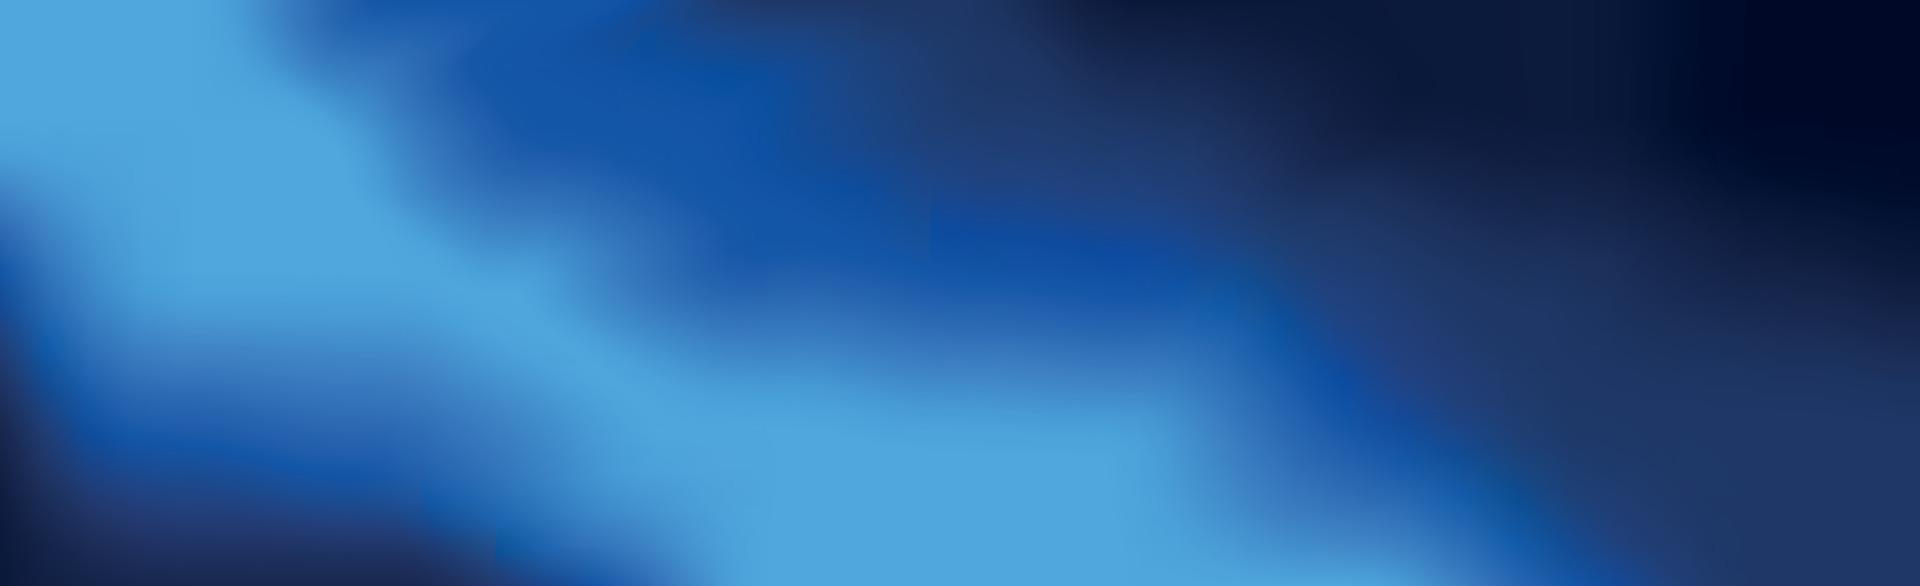 Abstract panoramic background dark blue gradient - Vector